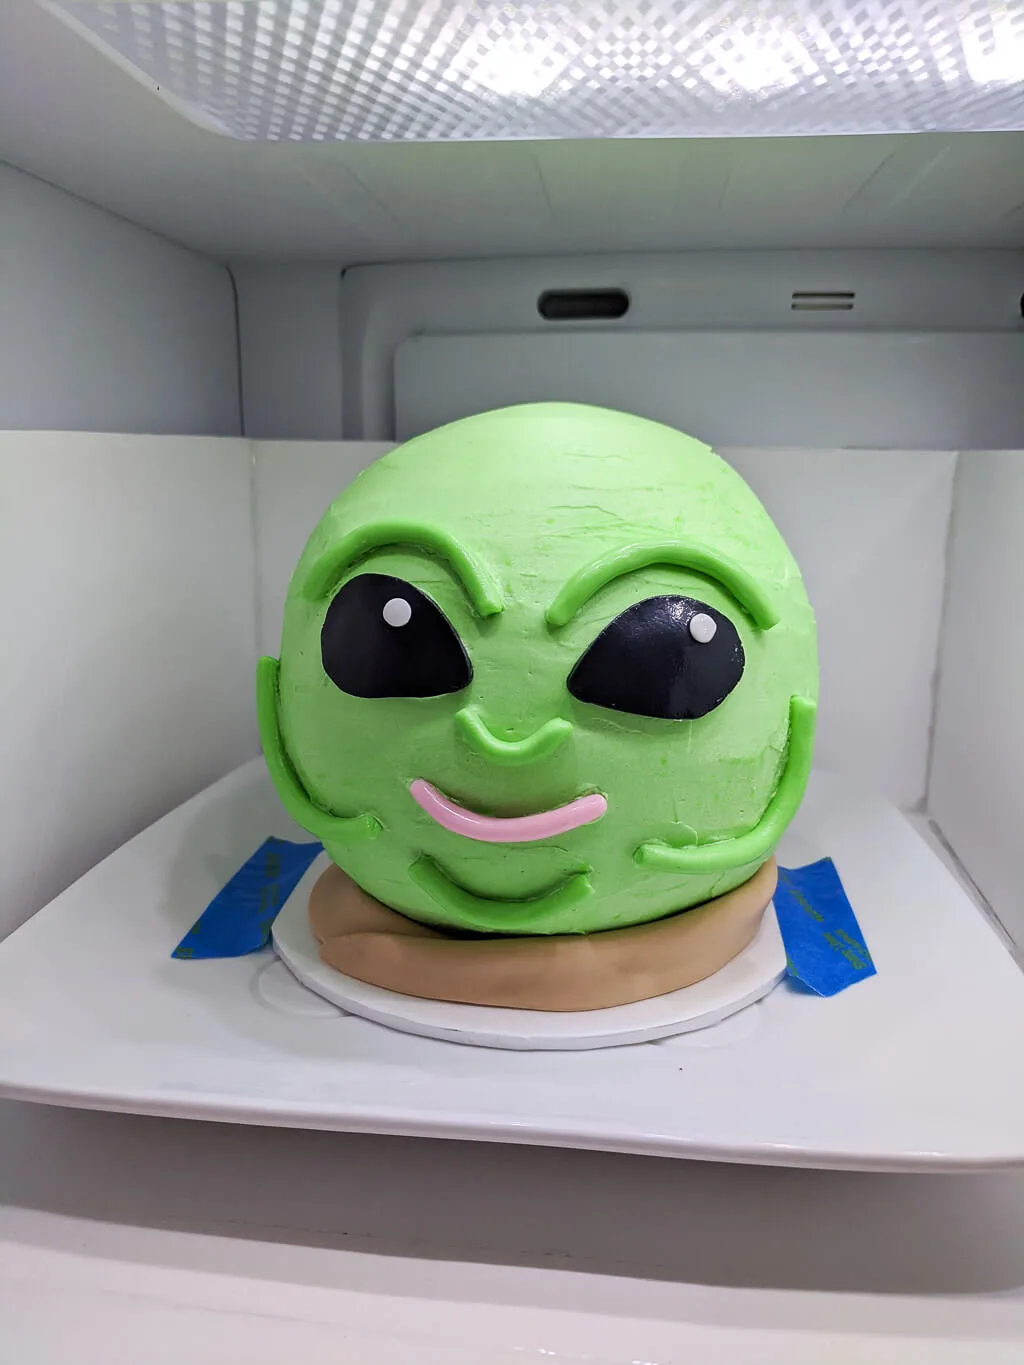 Baby Yoda head cake chilling in the refrigerator